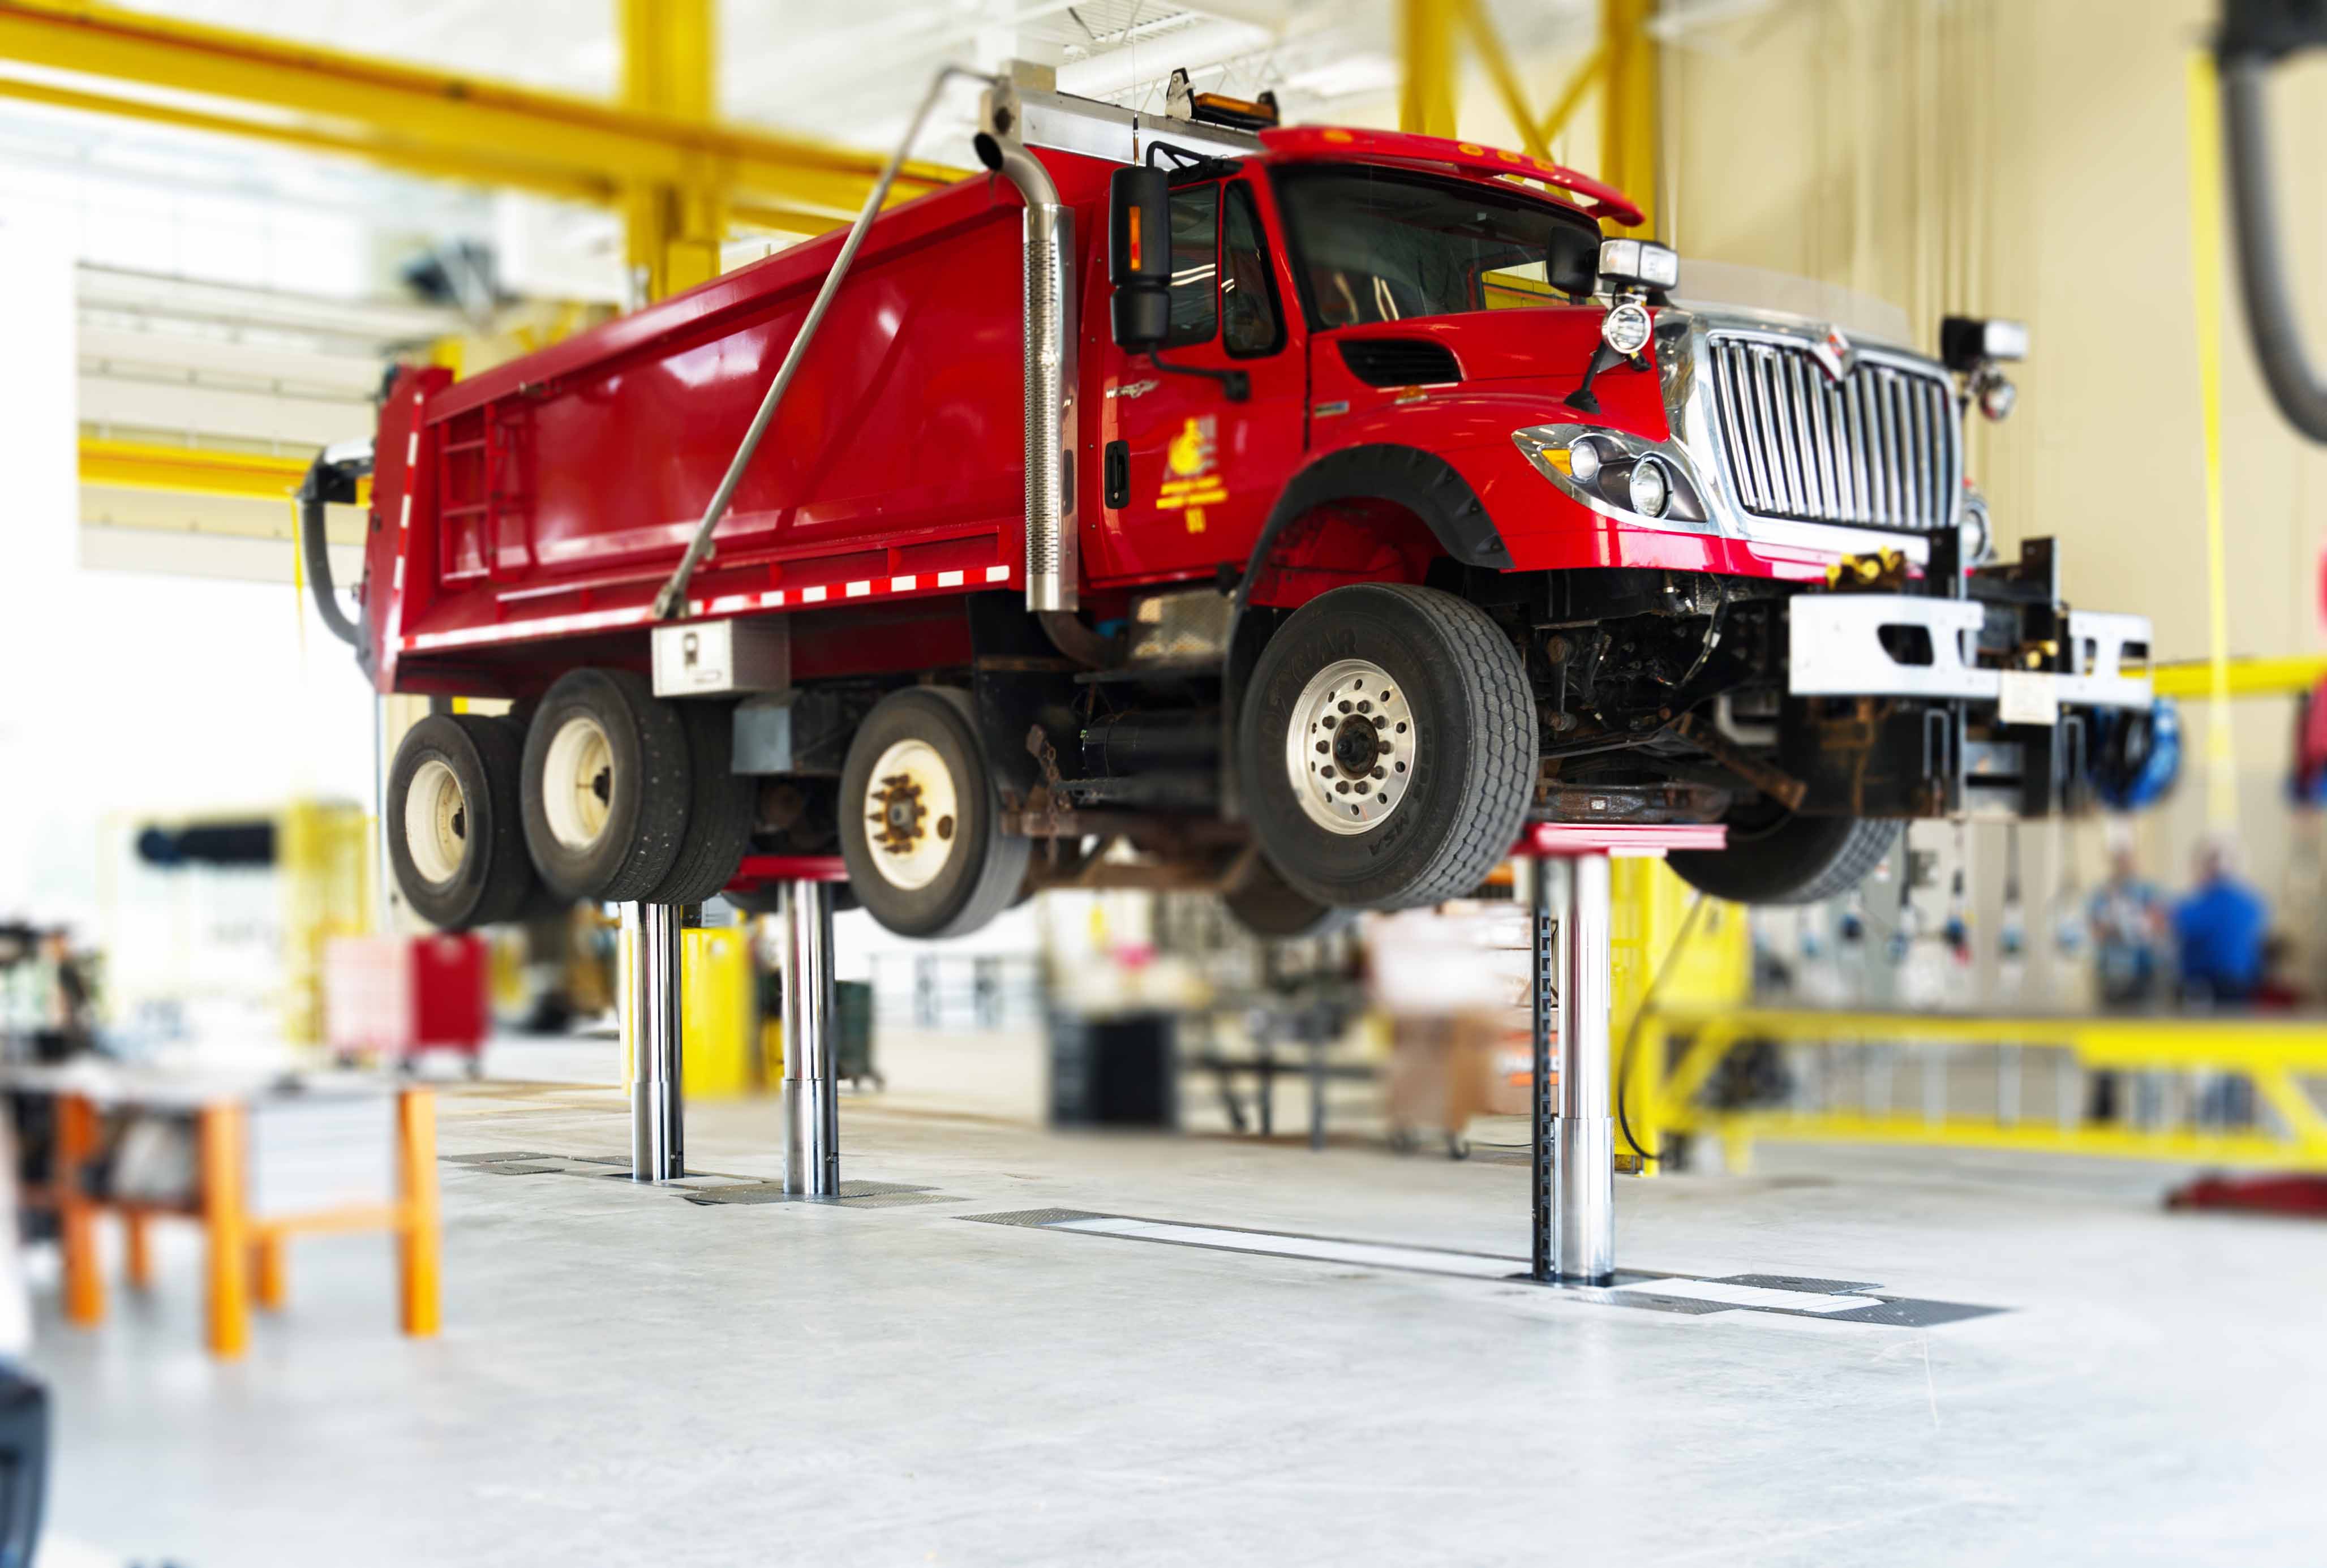 In-ground piston lifts enable wheels-free access to the vehicle.